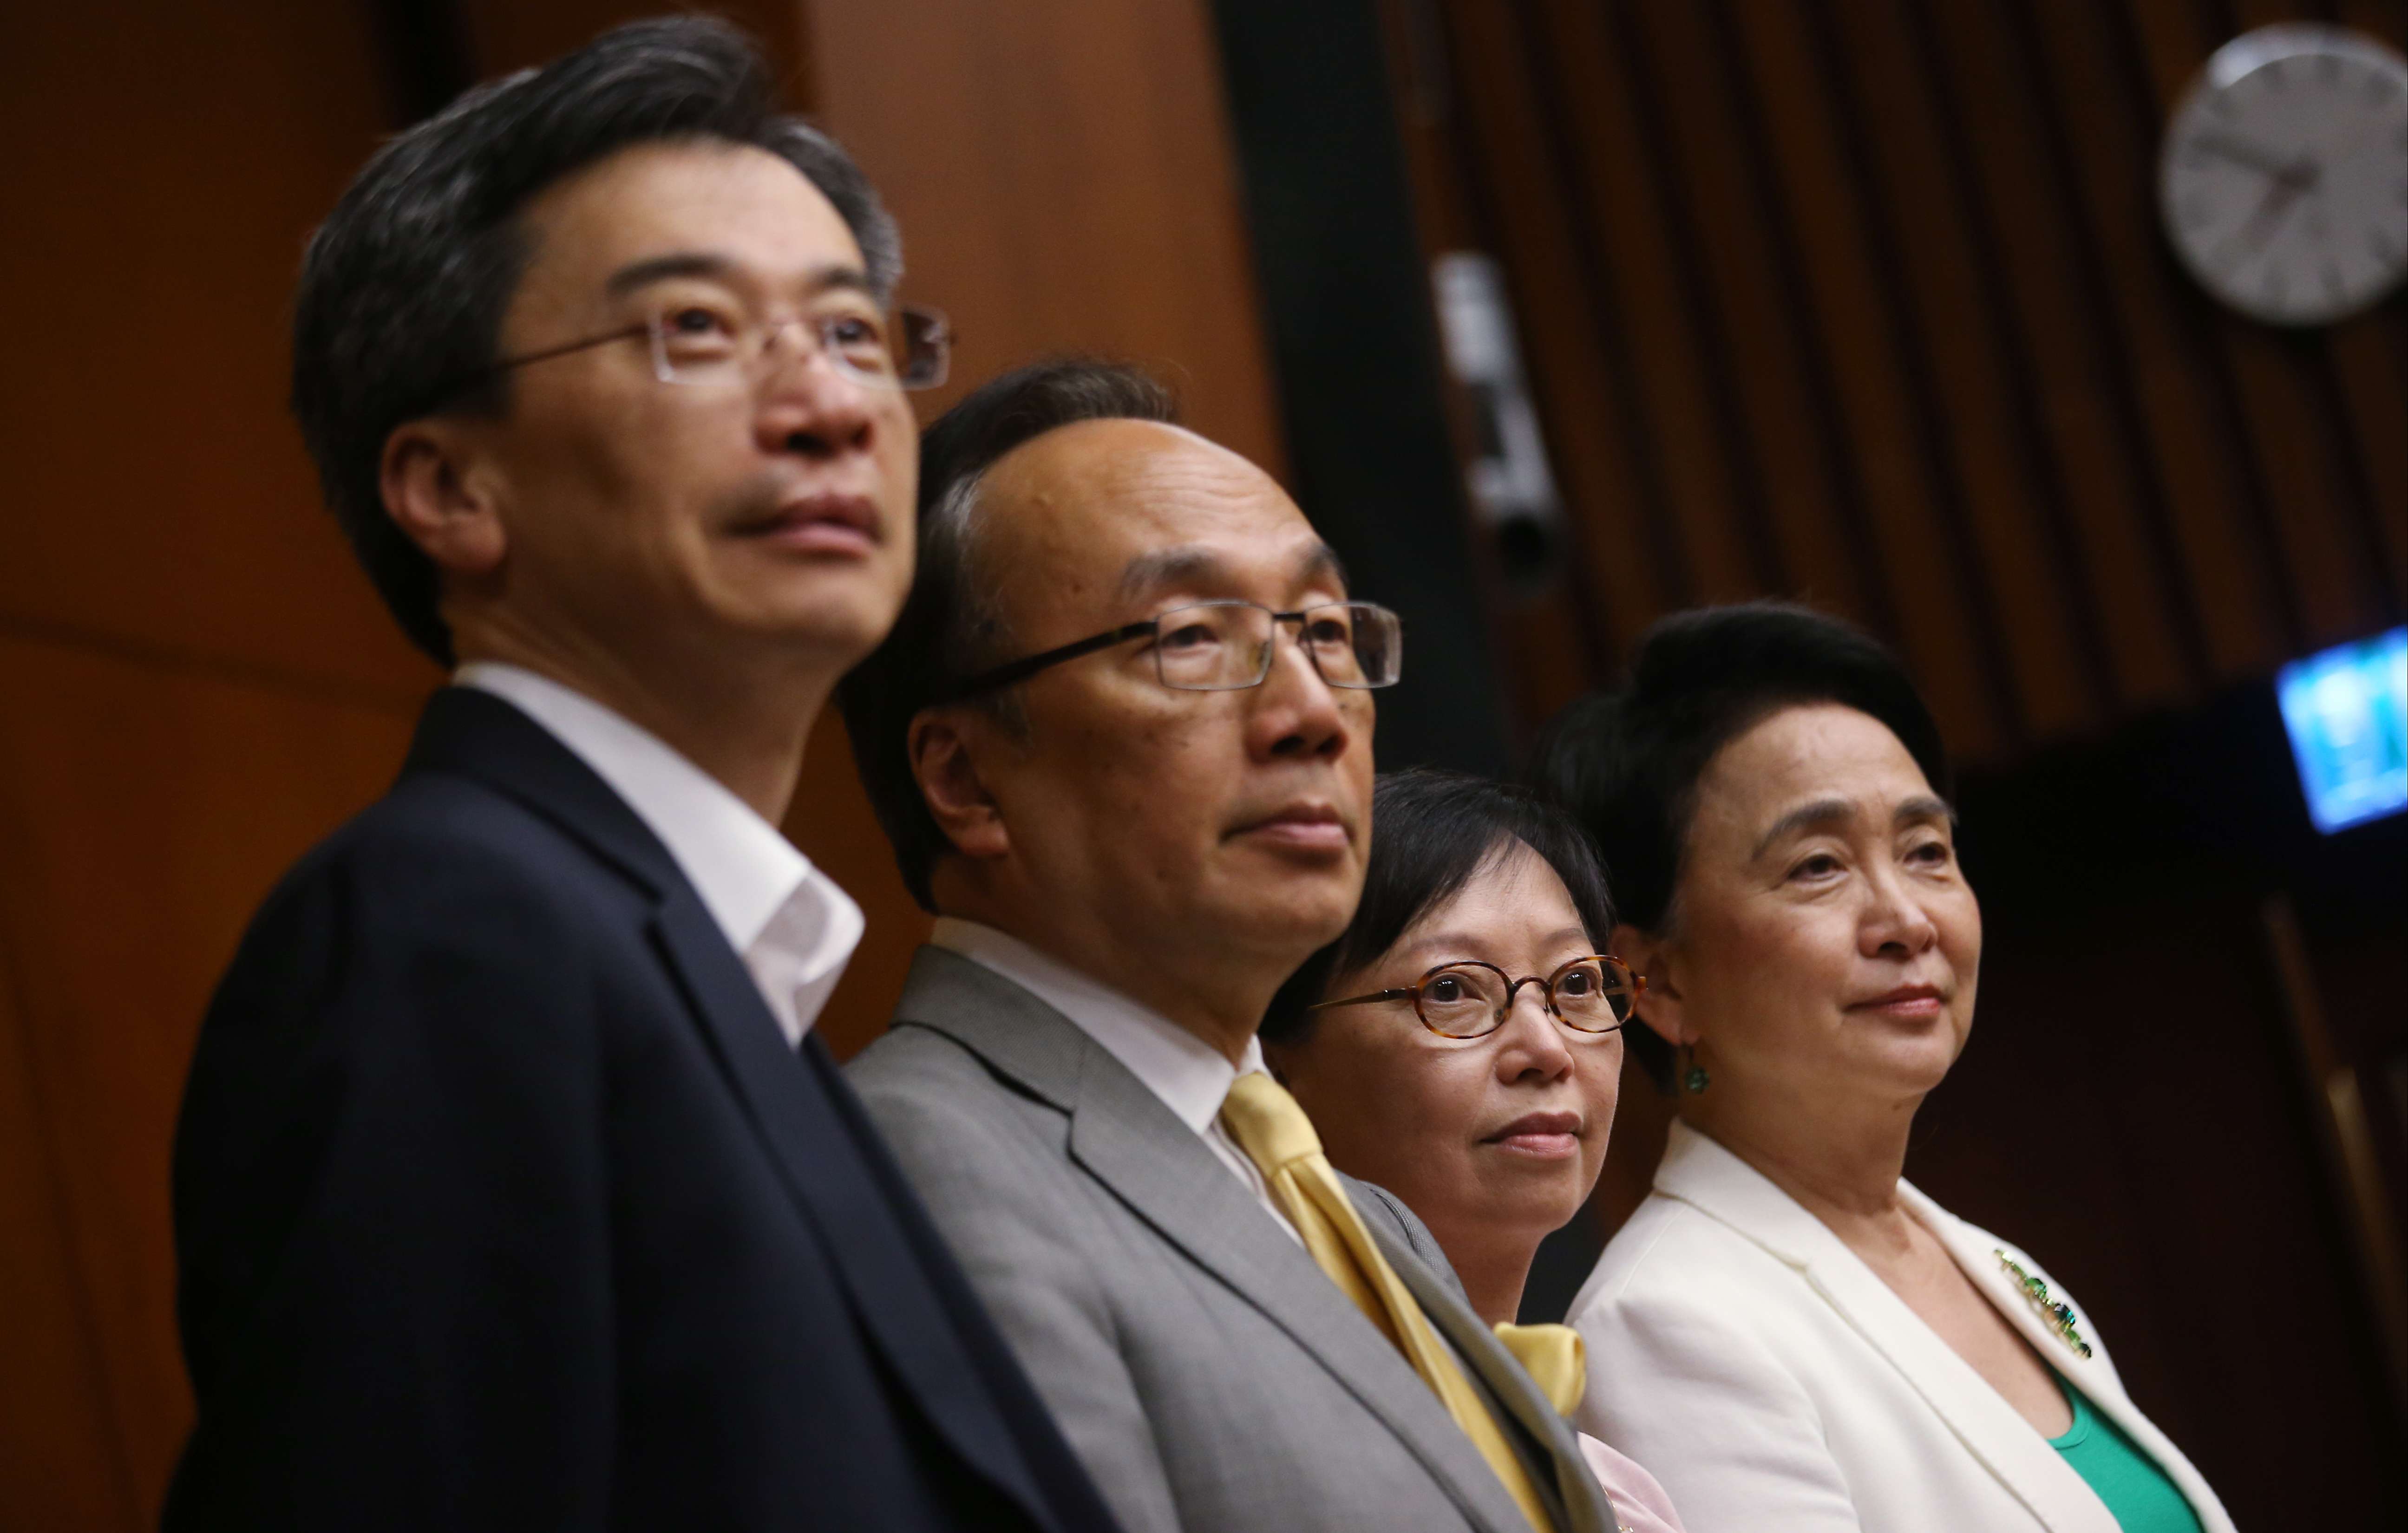 Pan-democrat lawmakers Joseph Lee, Alan Leong, Cyd Ho and Emily Lau seemed largely satisfied with their meeting with Zhang Dejiang. Photo: David Wong